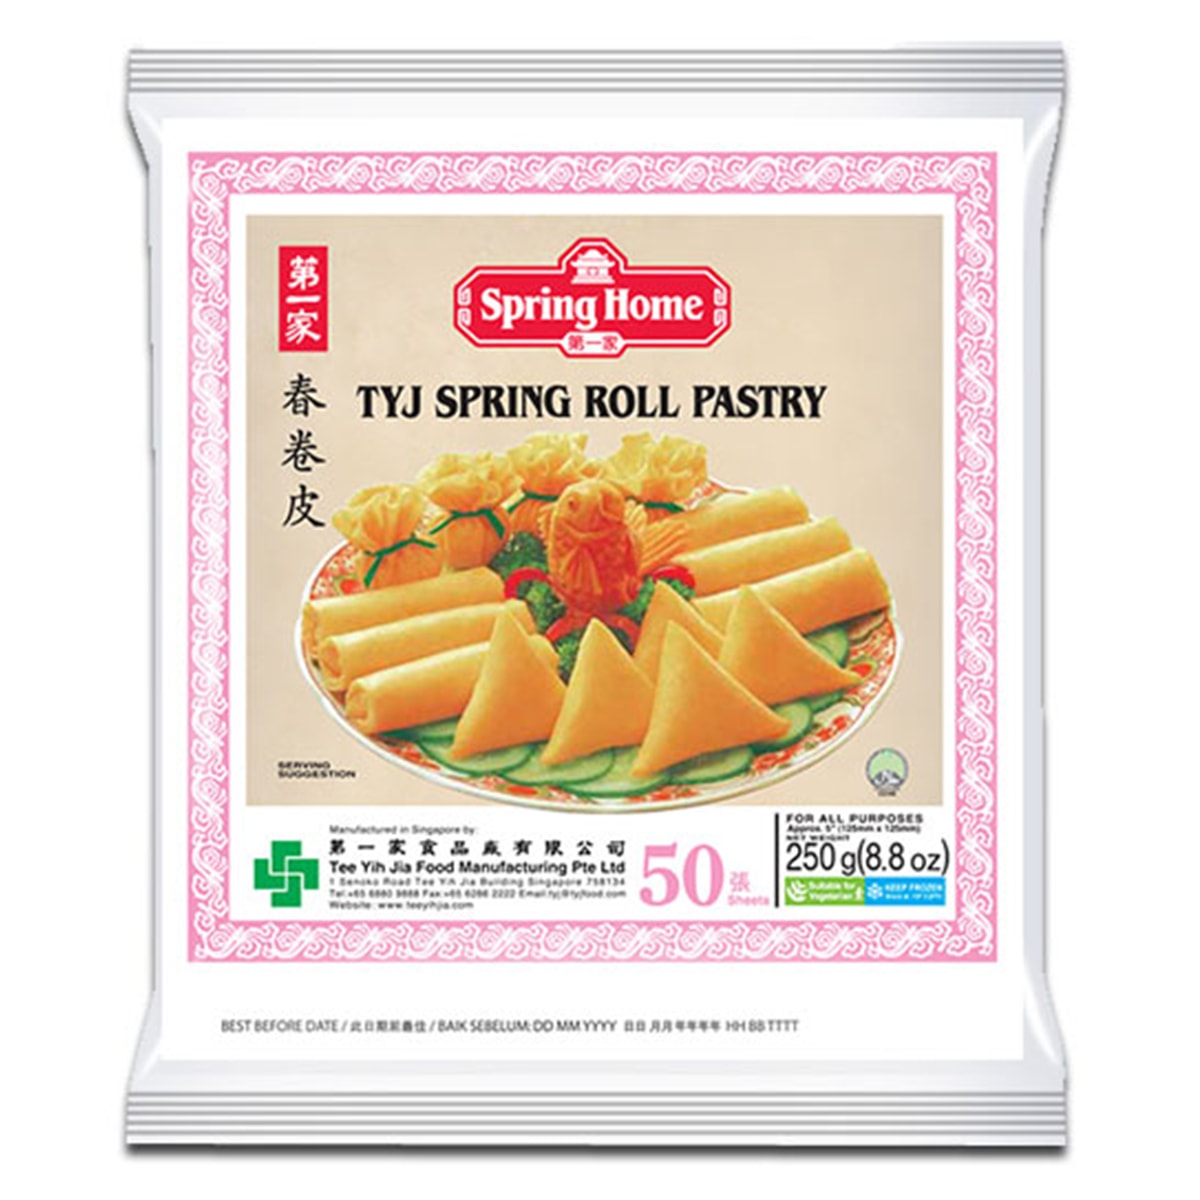 Buy Spring Home Frozen Tyg Spring Roll Pastry 50 Sheets [5 Inch (125mm) Square](Plain) - 250 gm